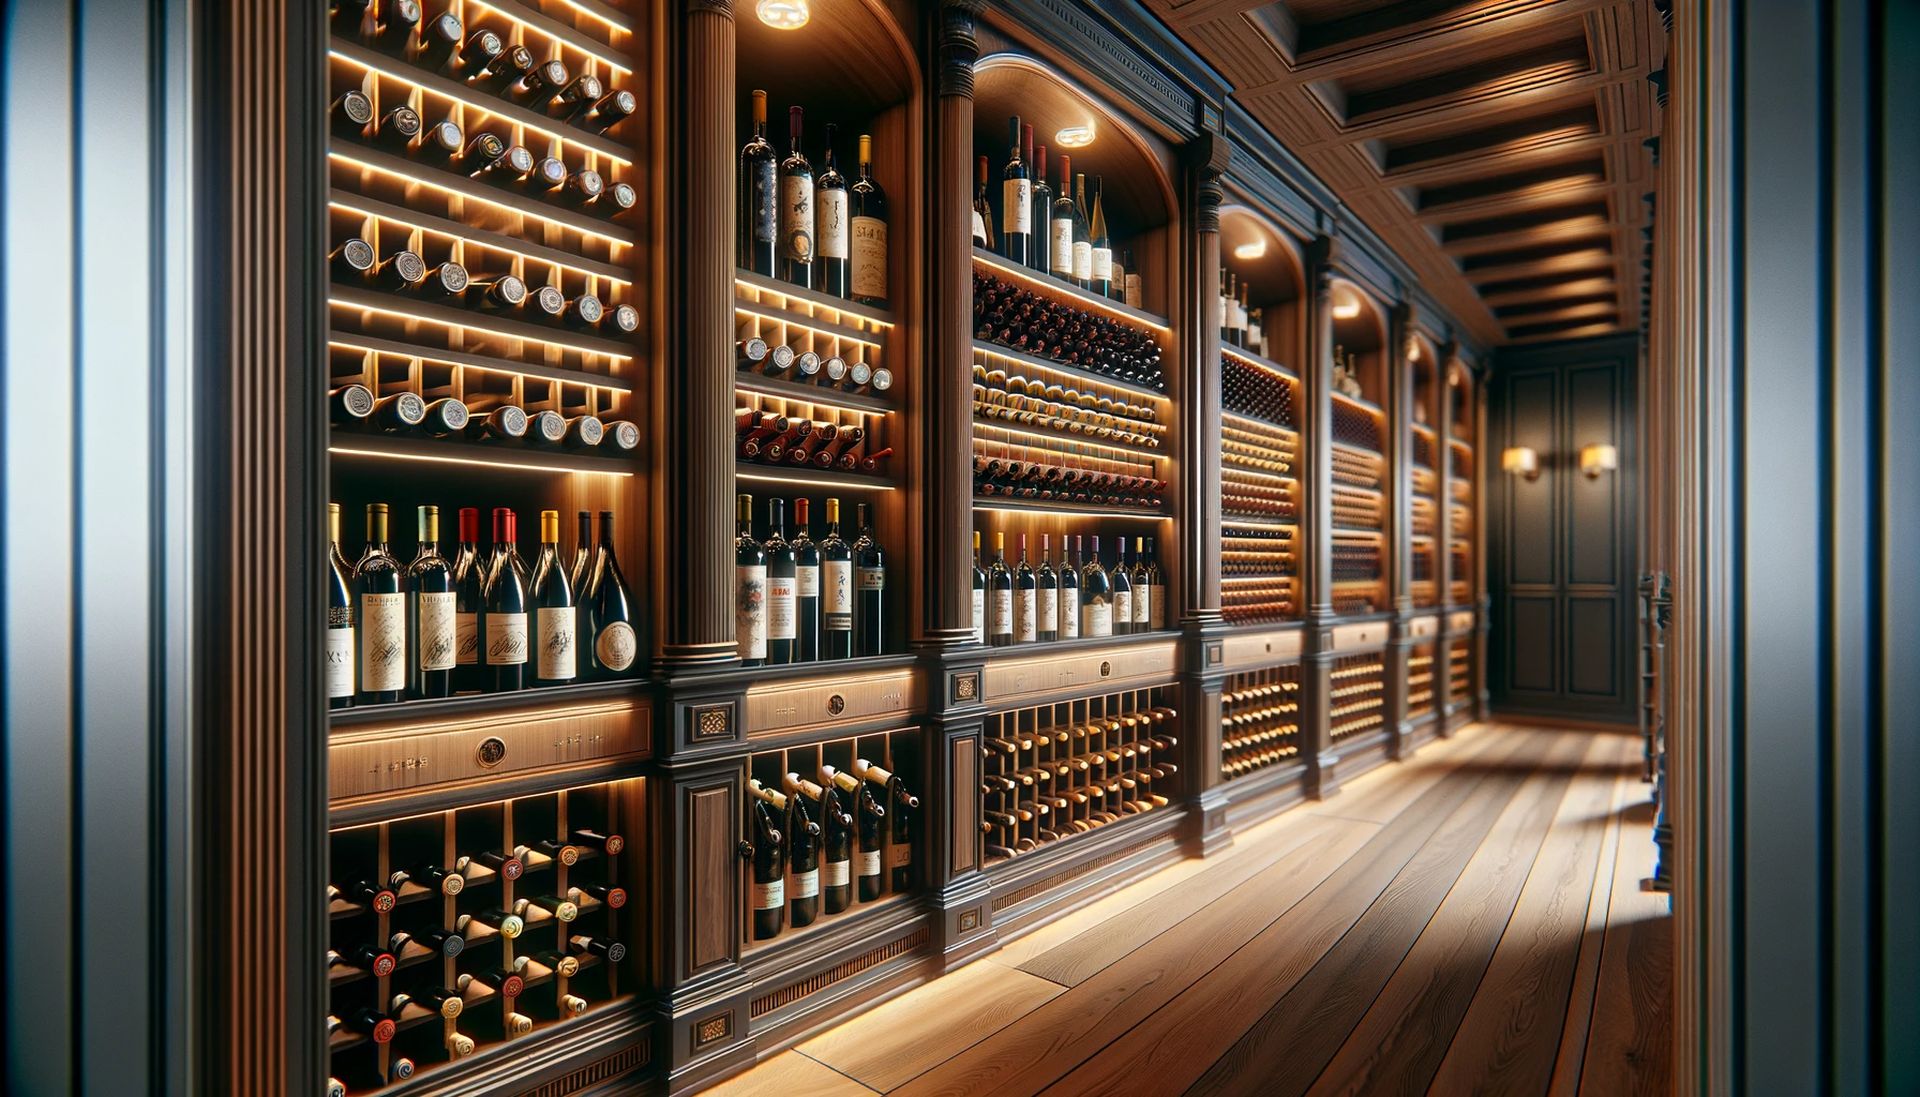 high-resolution image of a luxurious wine cellar showcasing a variety of vintage wines from different years and regions.  The image have an elegant and aged atmosphere, with wooden wine racks, ambient lighting, and visible labels indicating the vintage years.  by Encyclopedia Wines